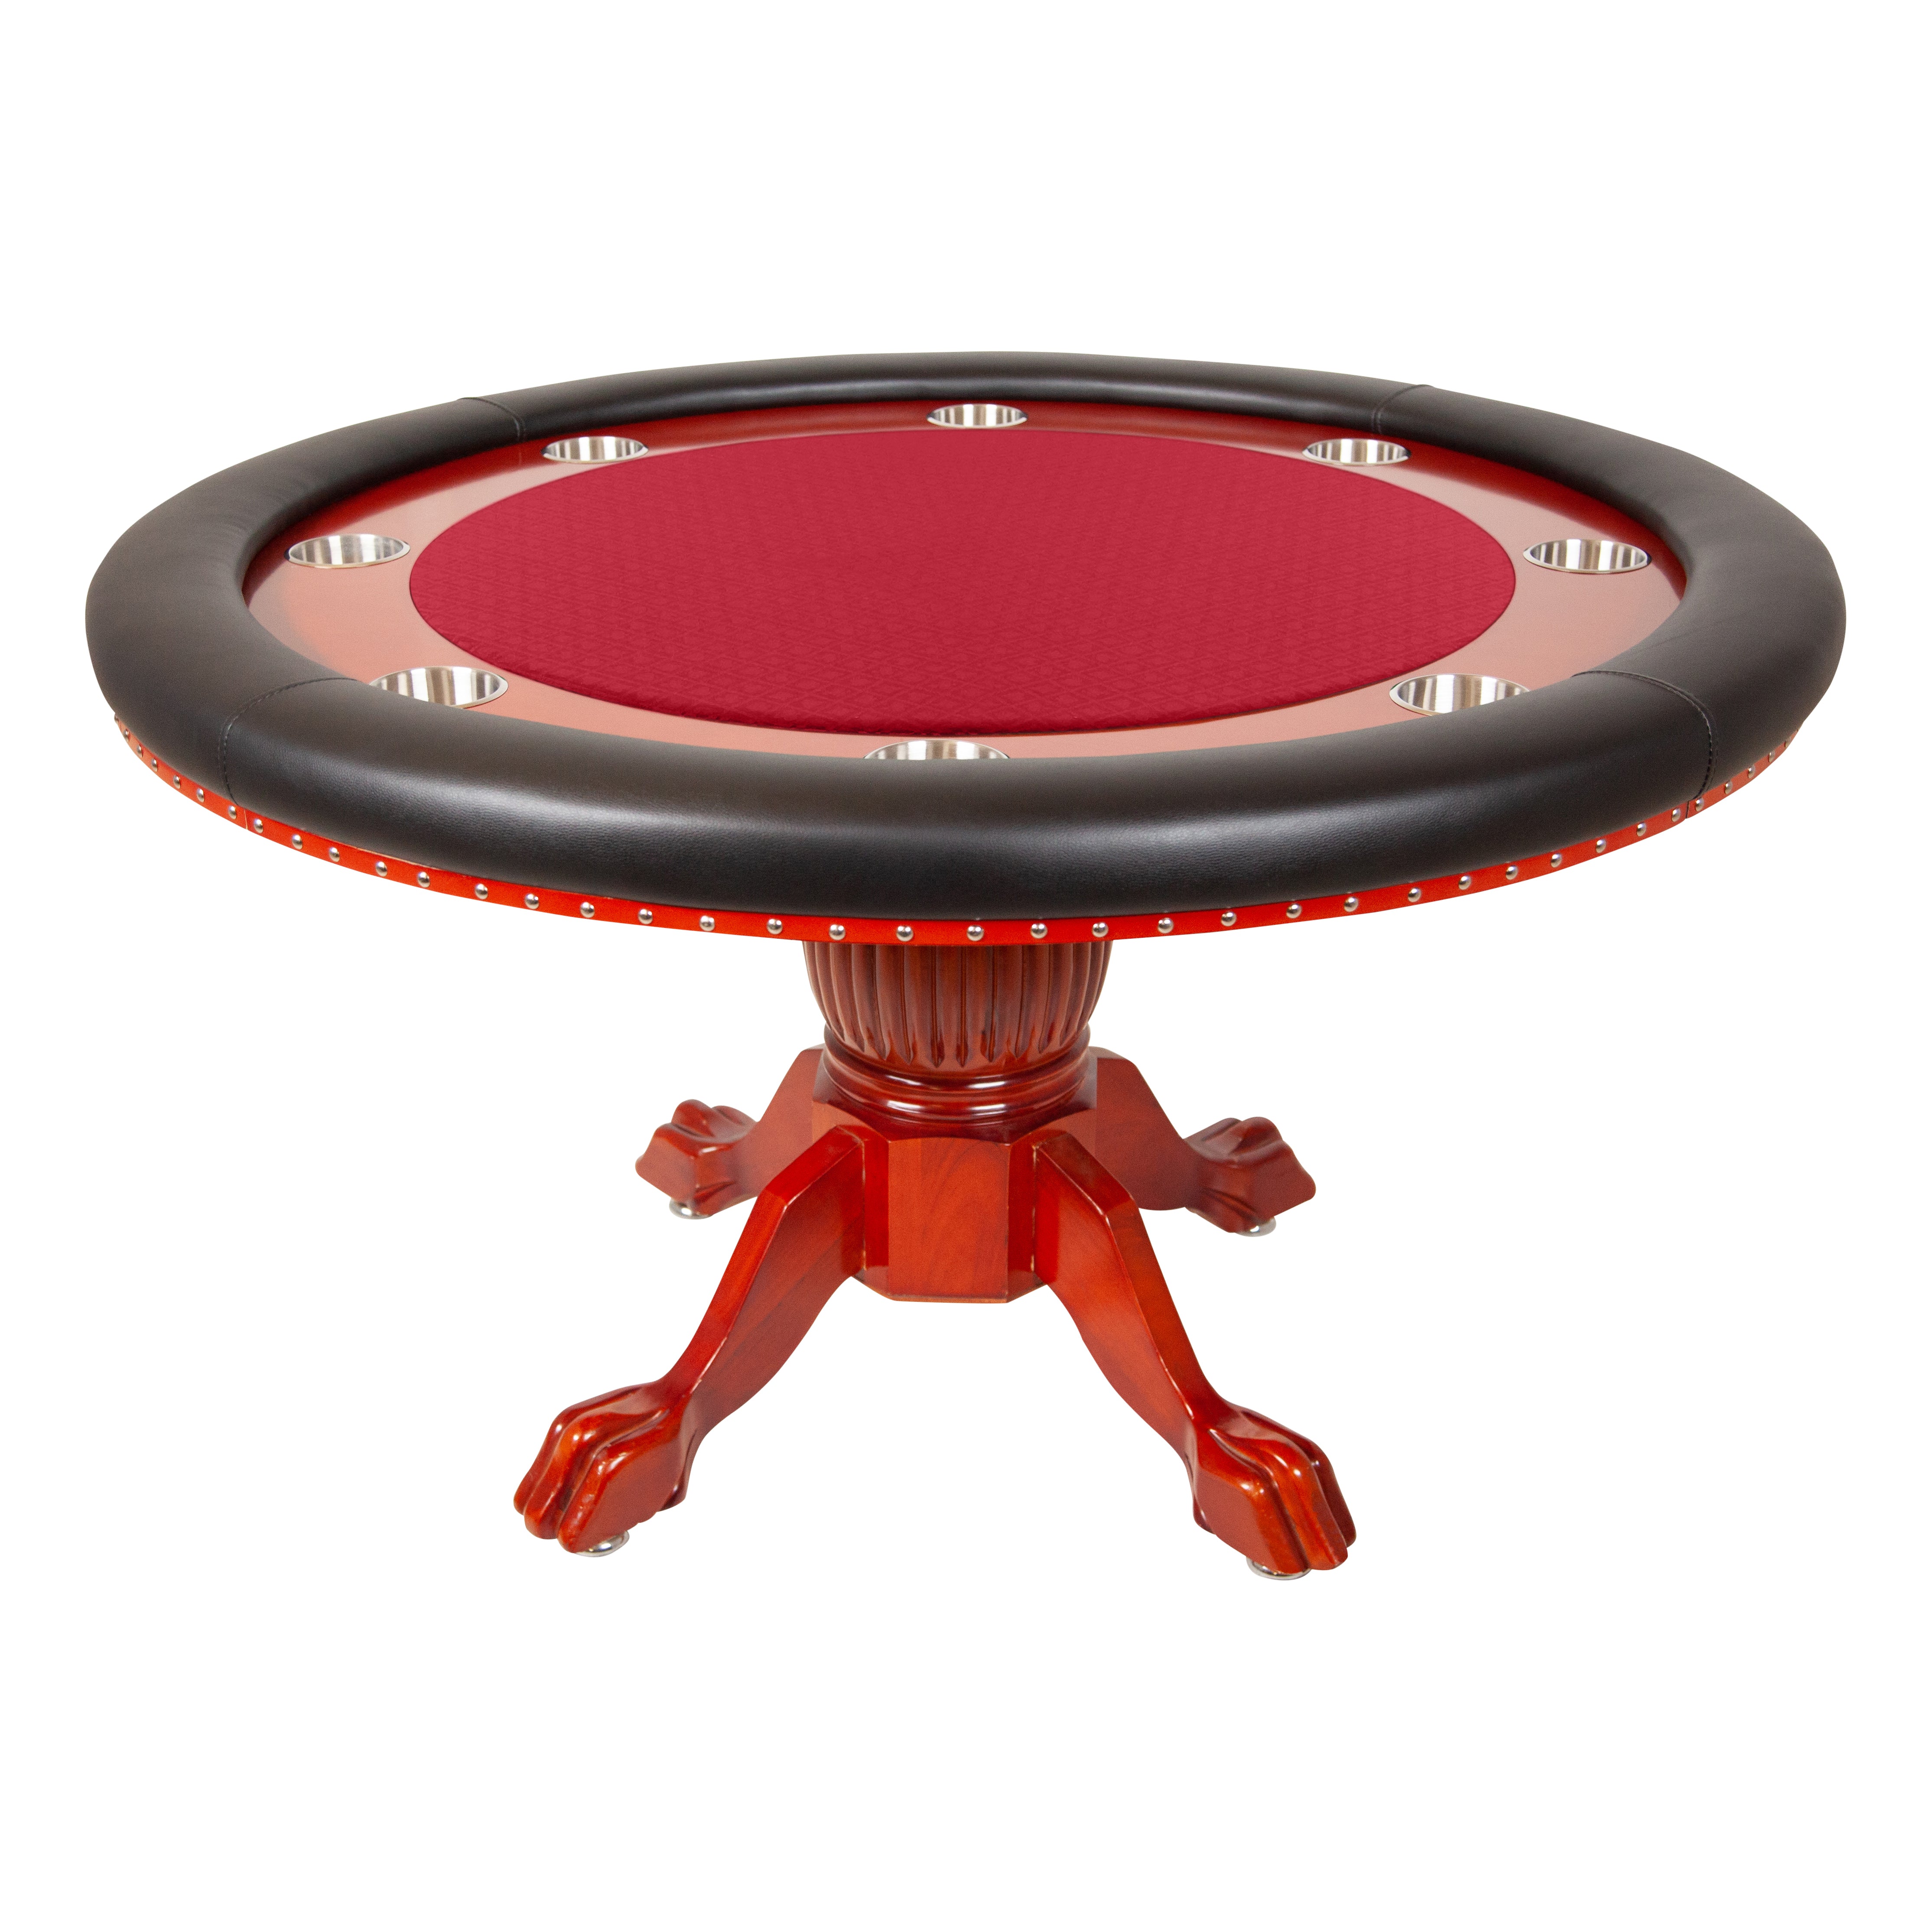 BBO Nighthawk Poker Table Mahogany Fat Track Suited Speed Red